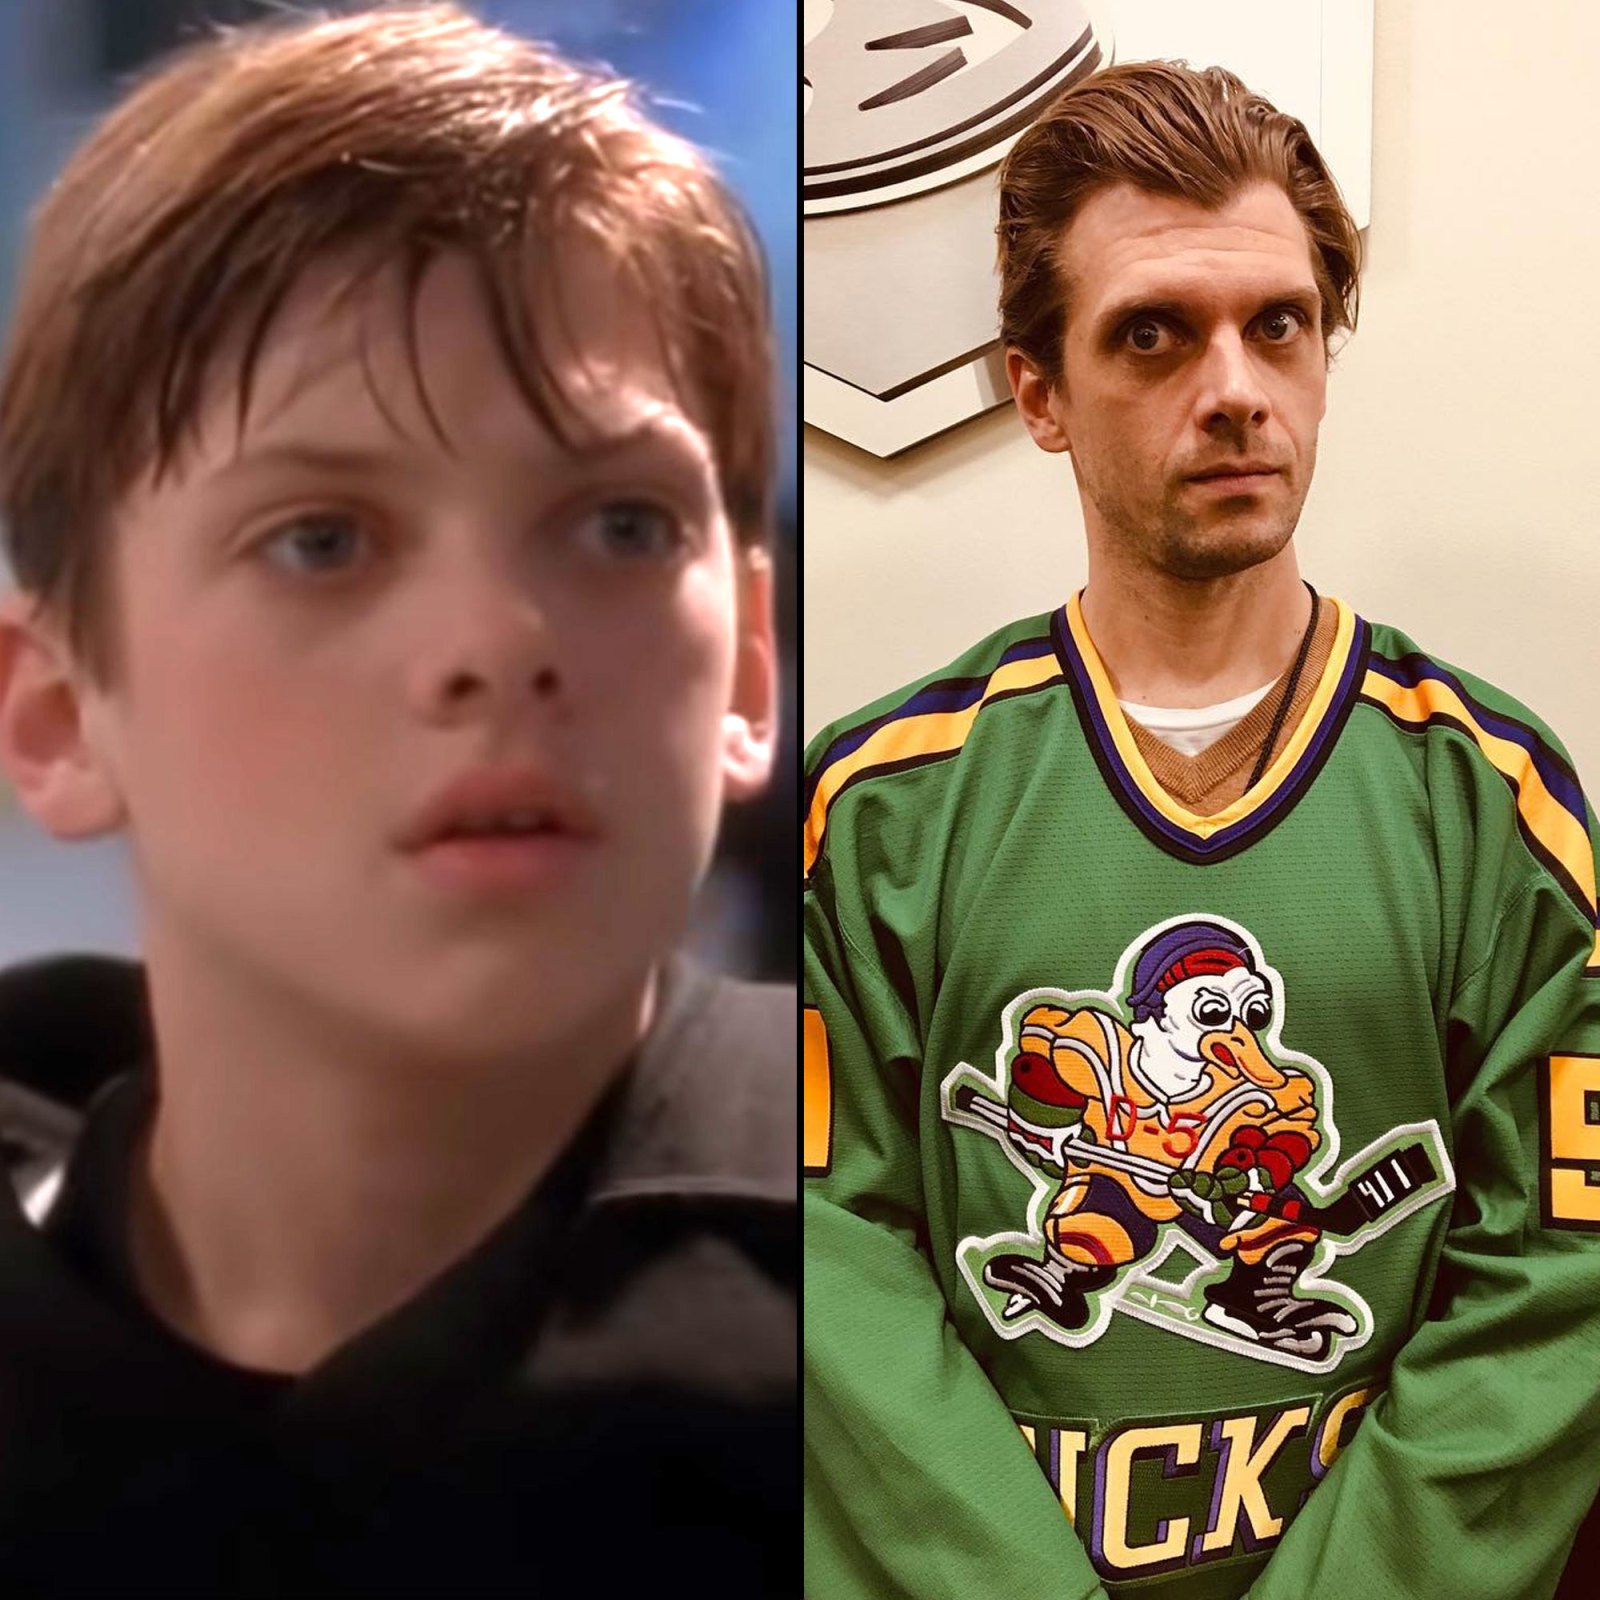 Vincent LaRusso The Mighty Ducks OG Cast Where They Are Now